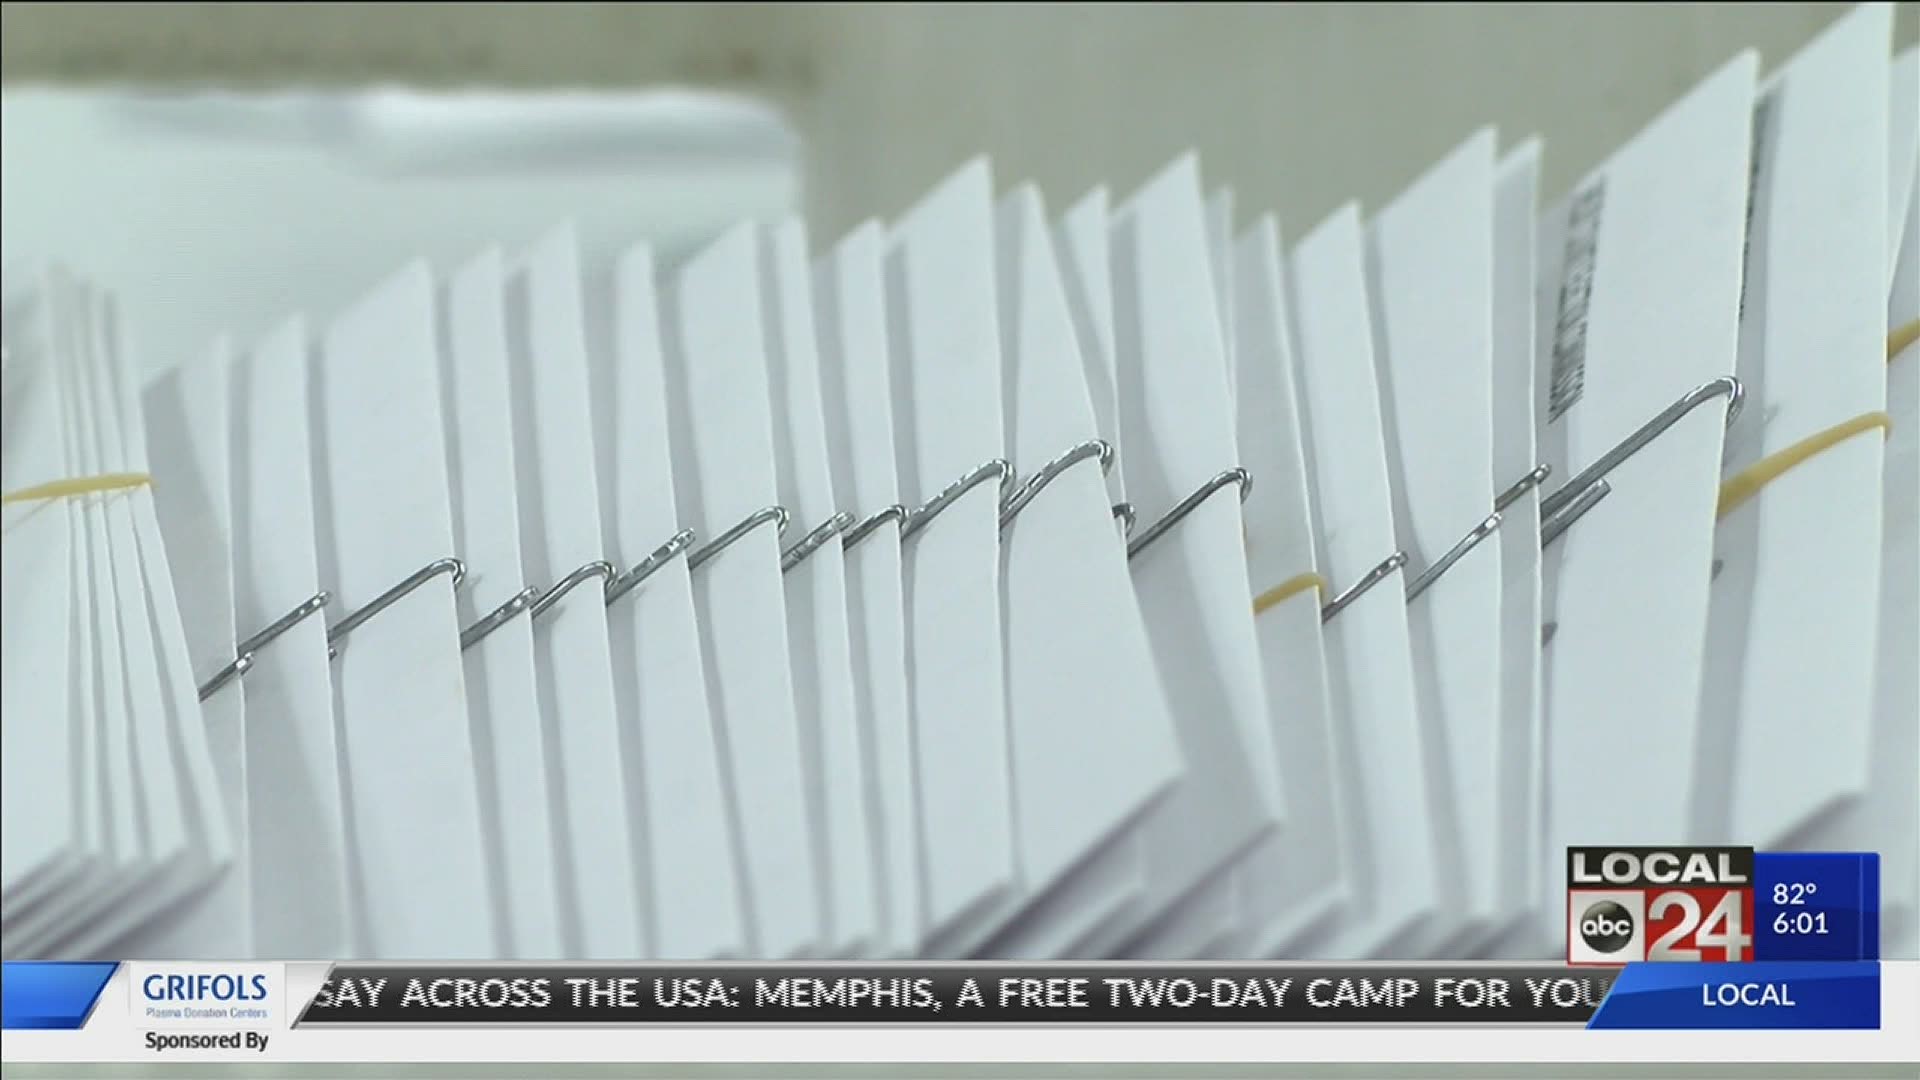 Around 5,000 such ballots went out Wednesday, tens of thousands additional requests expected in coming weeks.